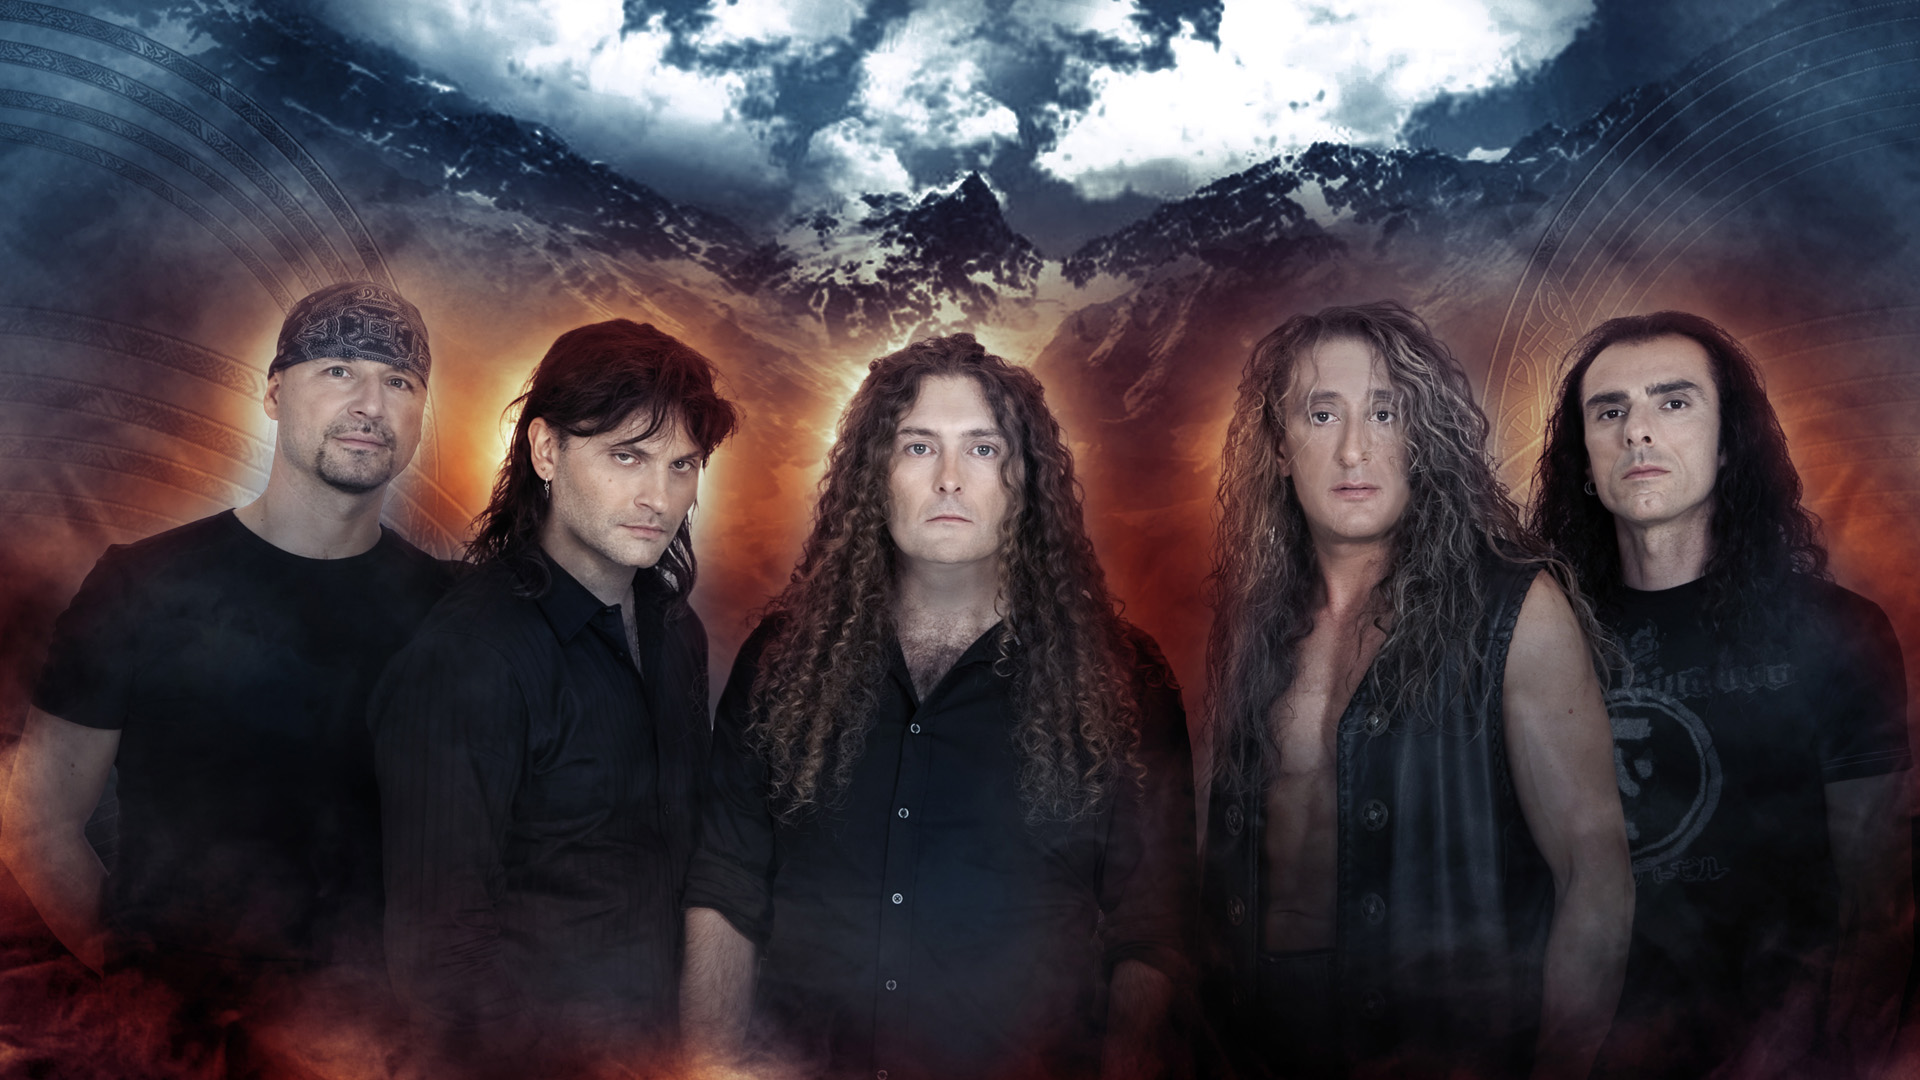 Rhapsody Of Fire Backgrounds, Compatible - PC, Mobile, Gadgets| 1920x1080 px